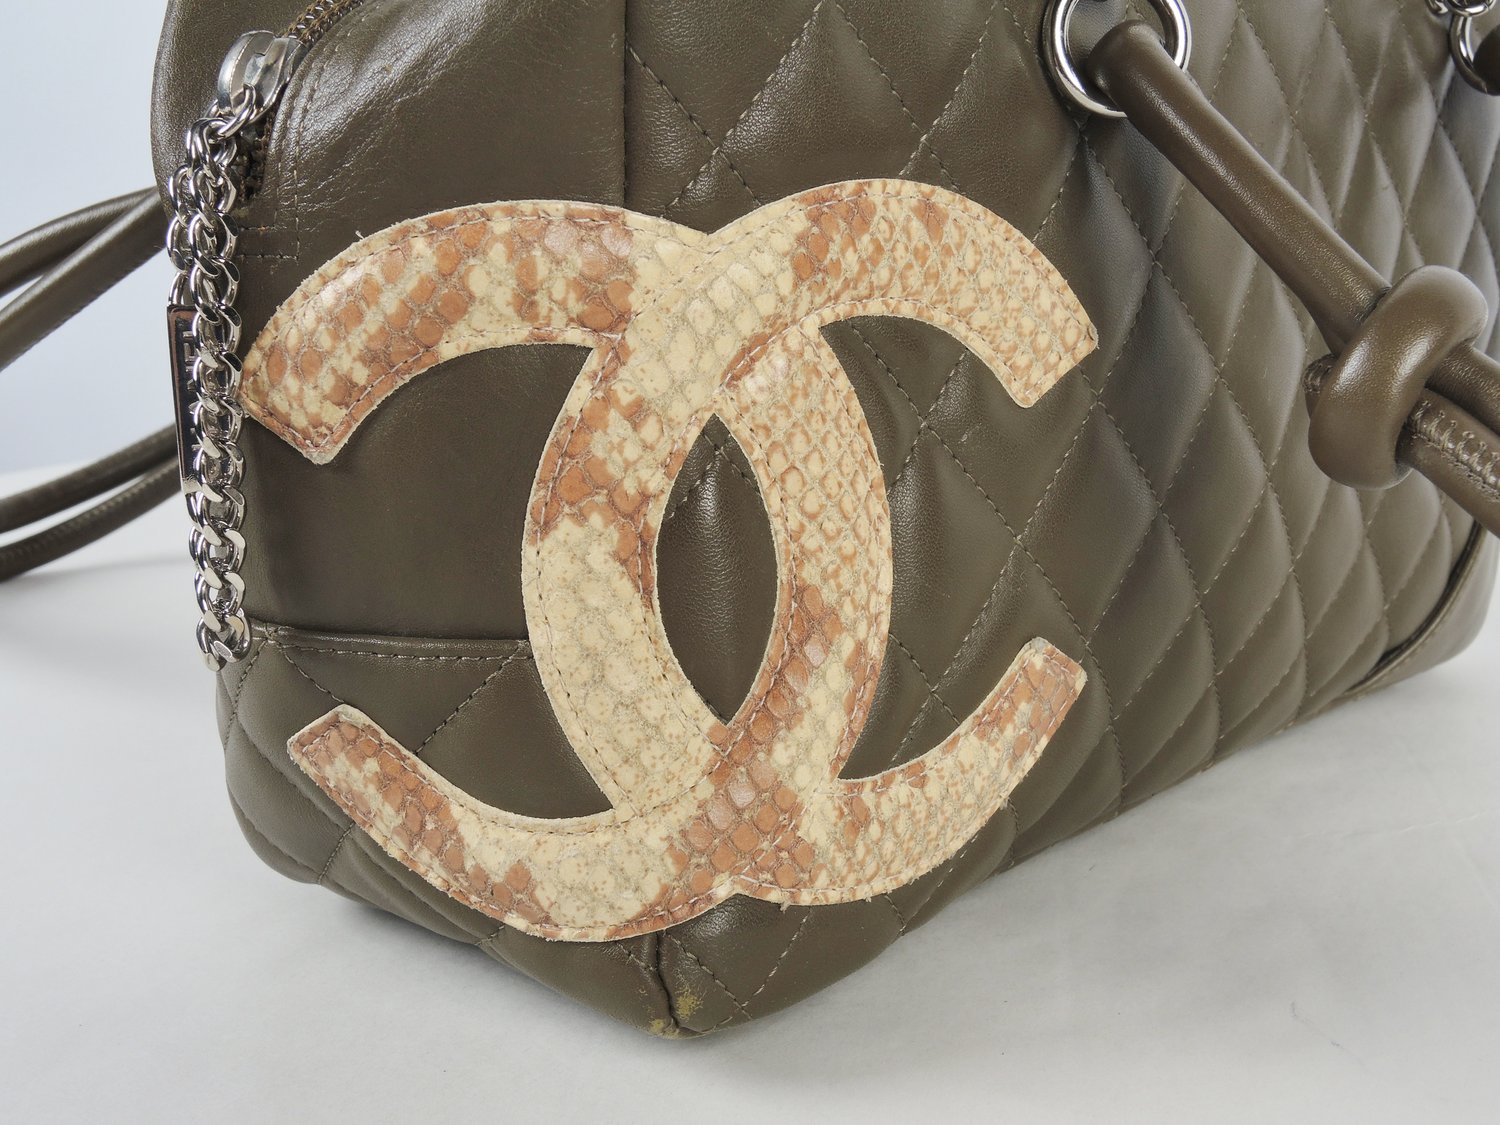 Chanel Black Quilted Leather Cambon Ligne Bowler Bag Chanel